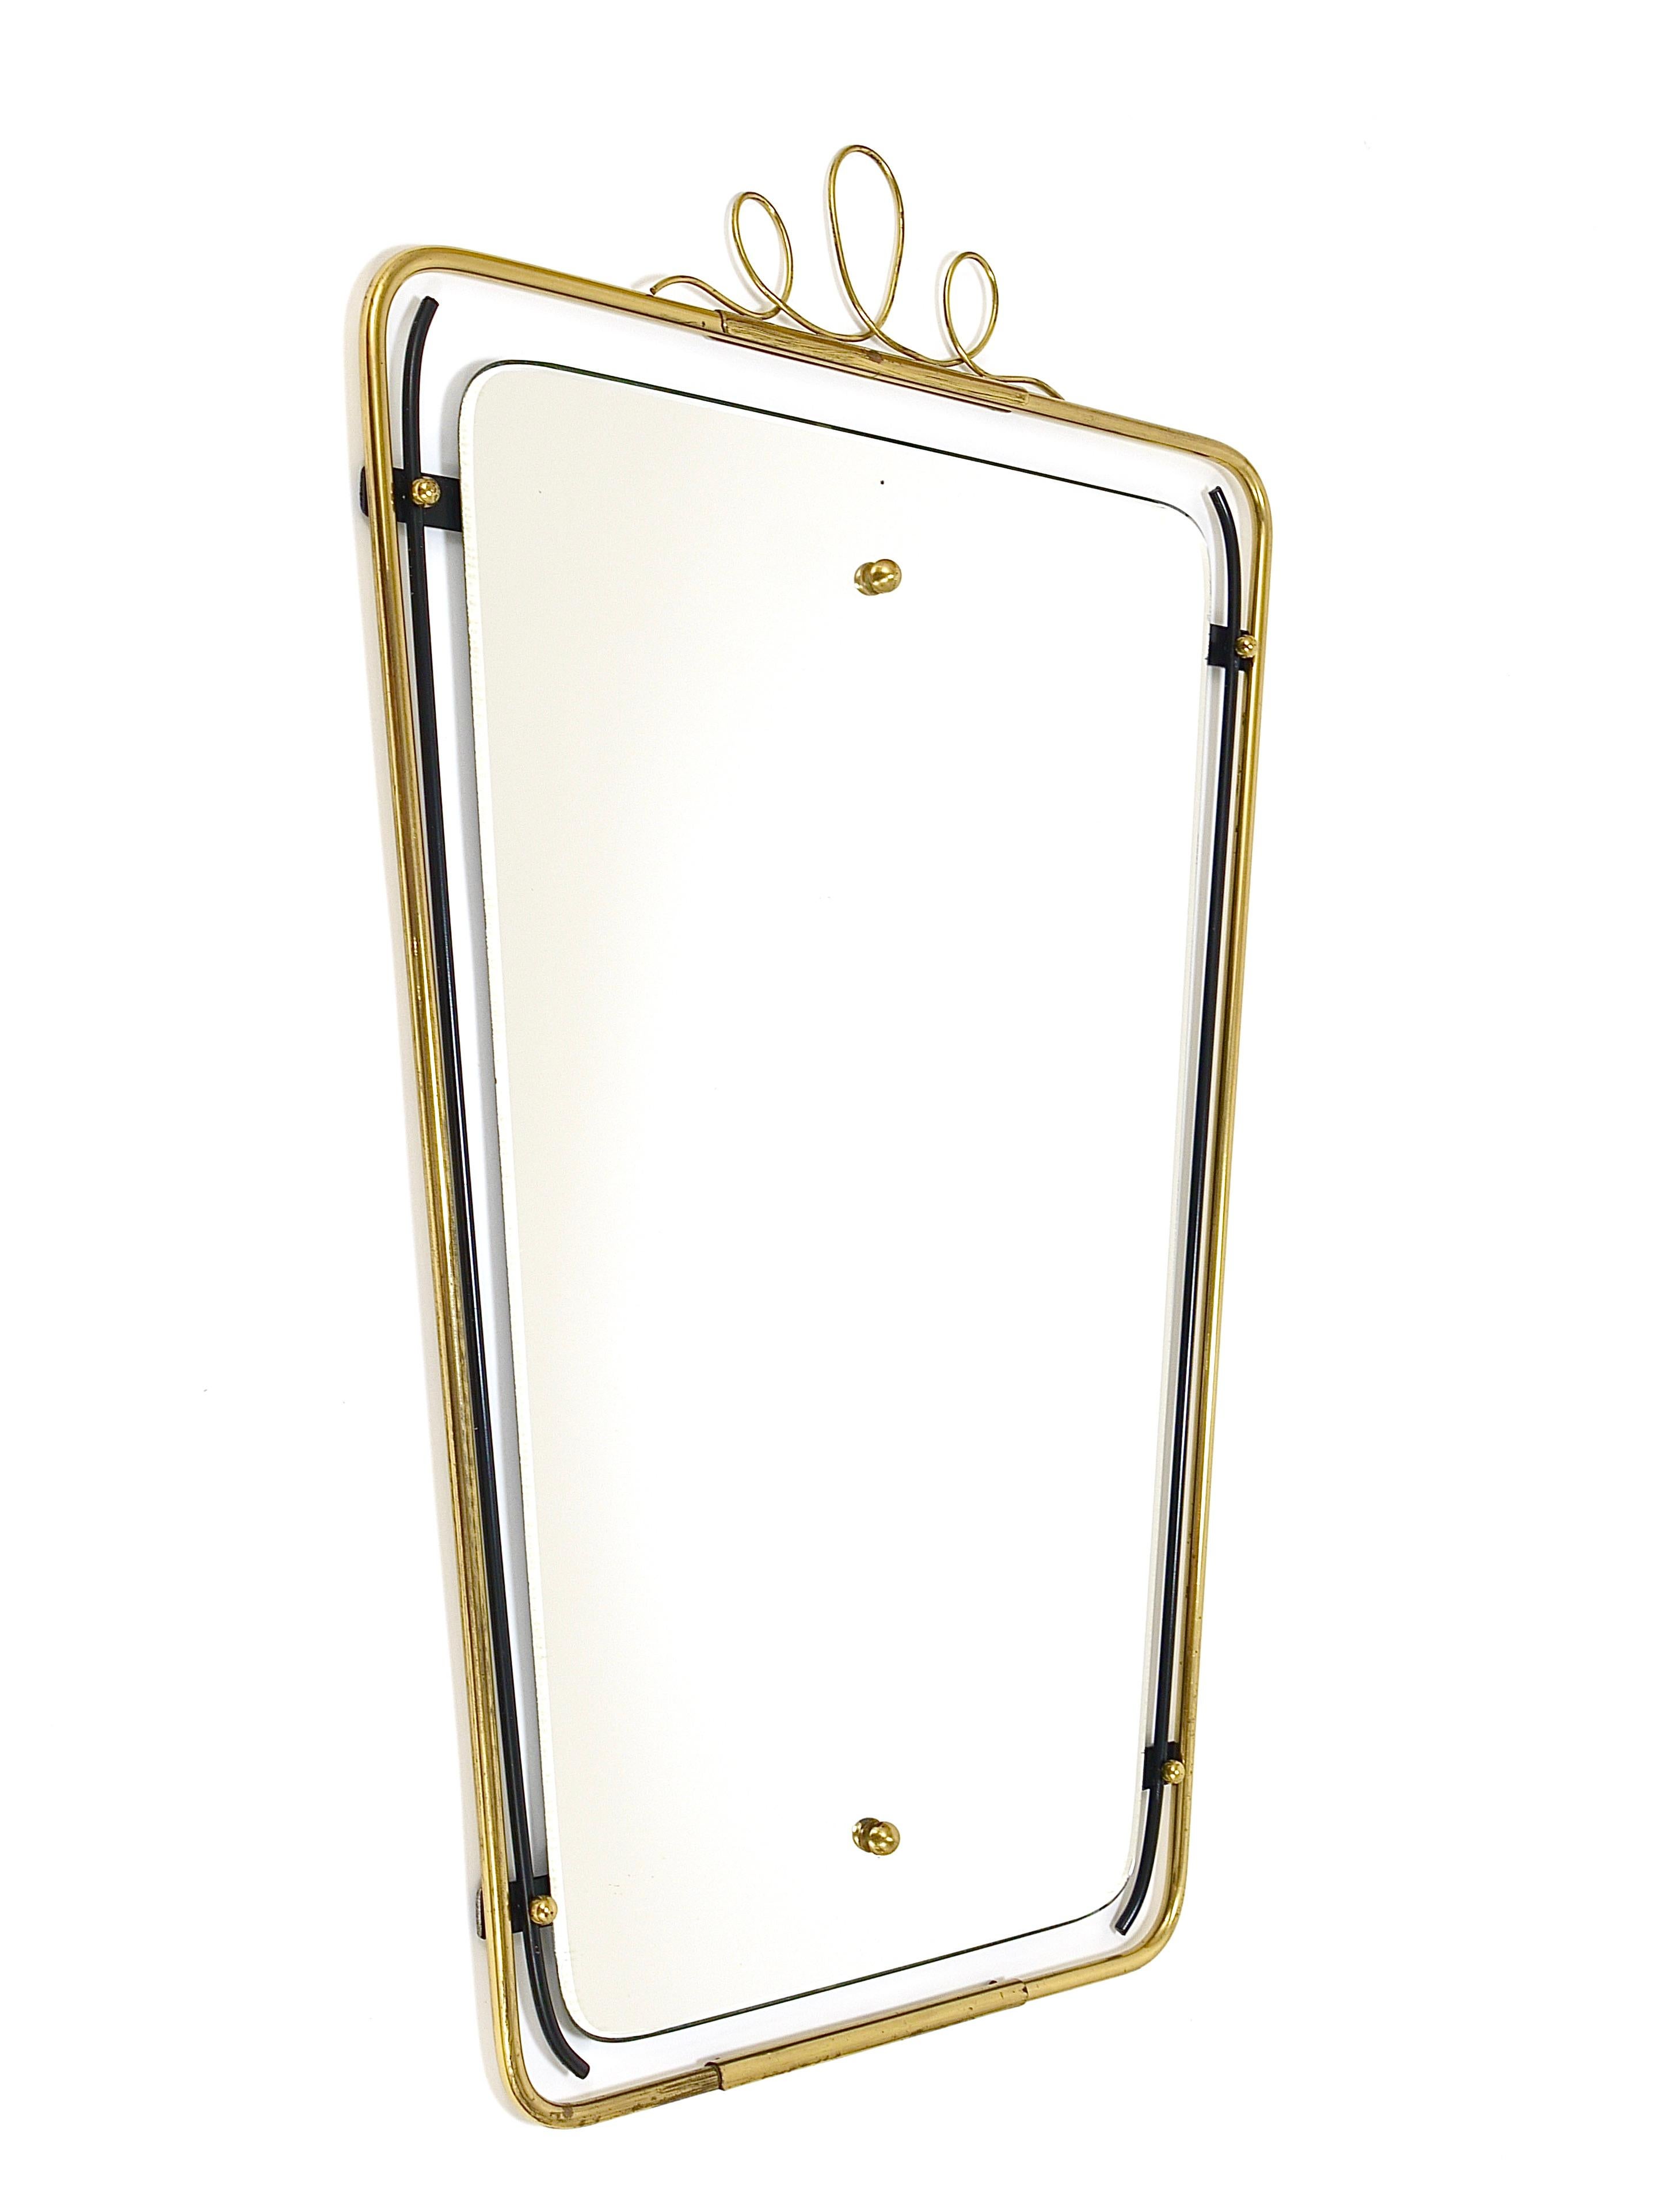 Midcentury Modern Brass Loops Wire Wall mirror, Italy, 1950s For Sale 8